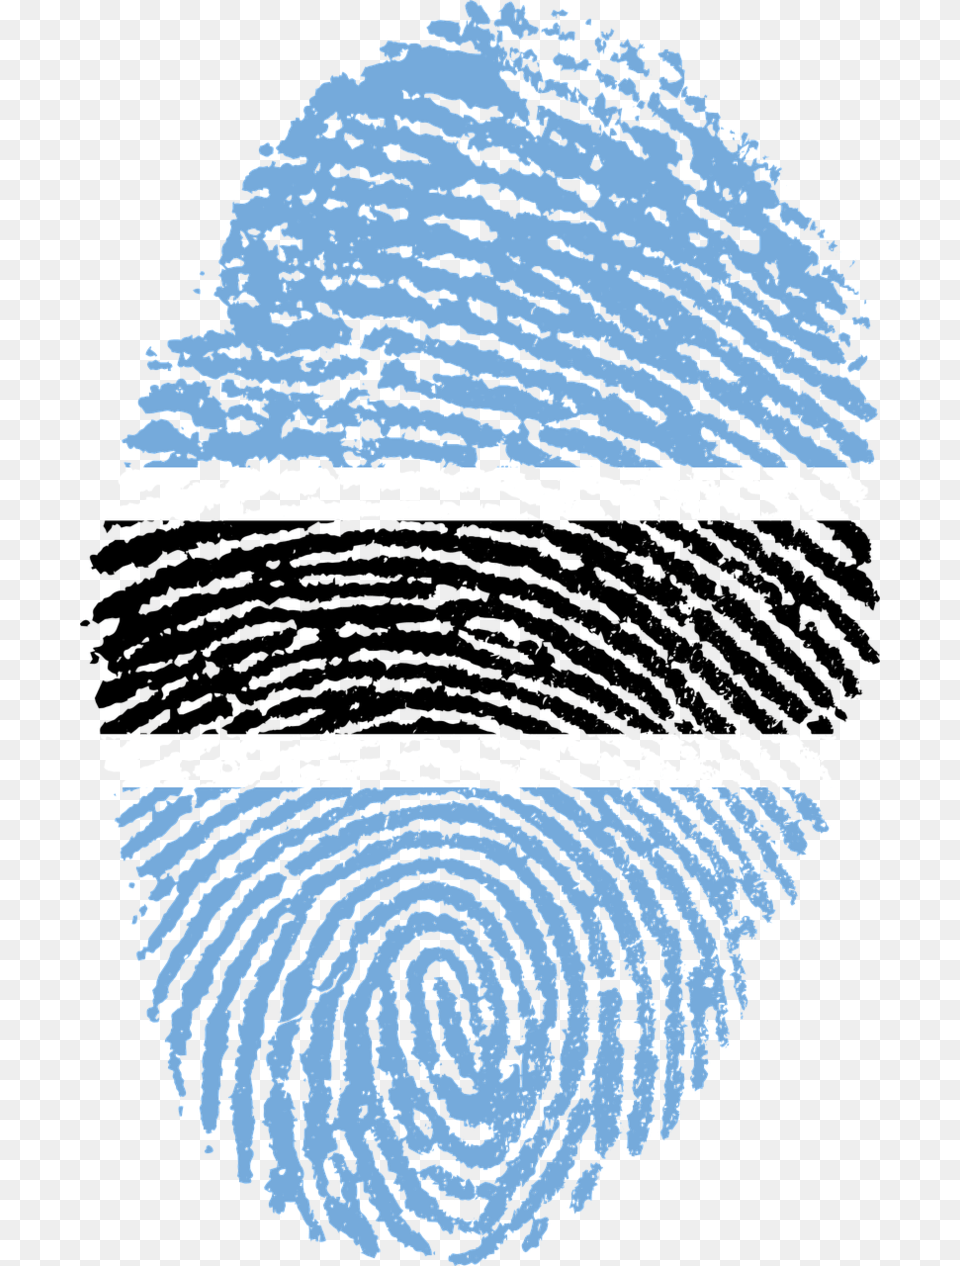 Fingerprint Image With Transparent Chinese Fingerprint, Home Decor, Rug, Person, Outdoors Png